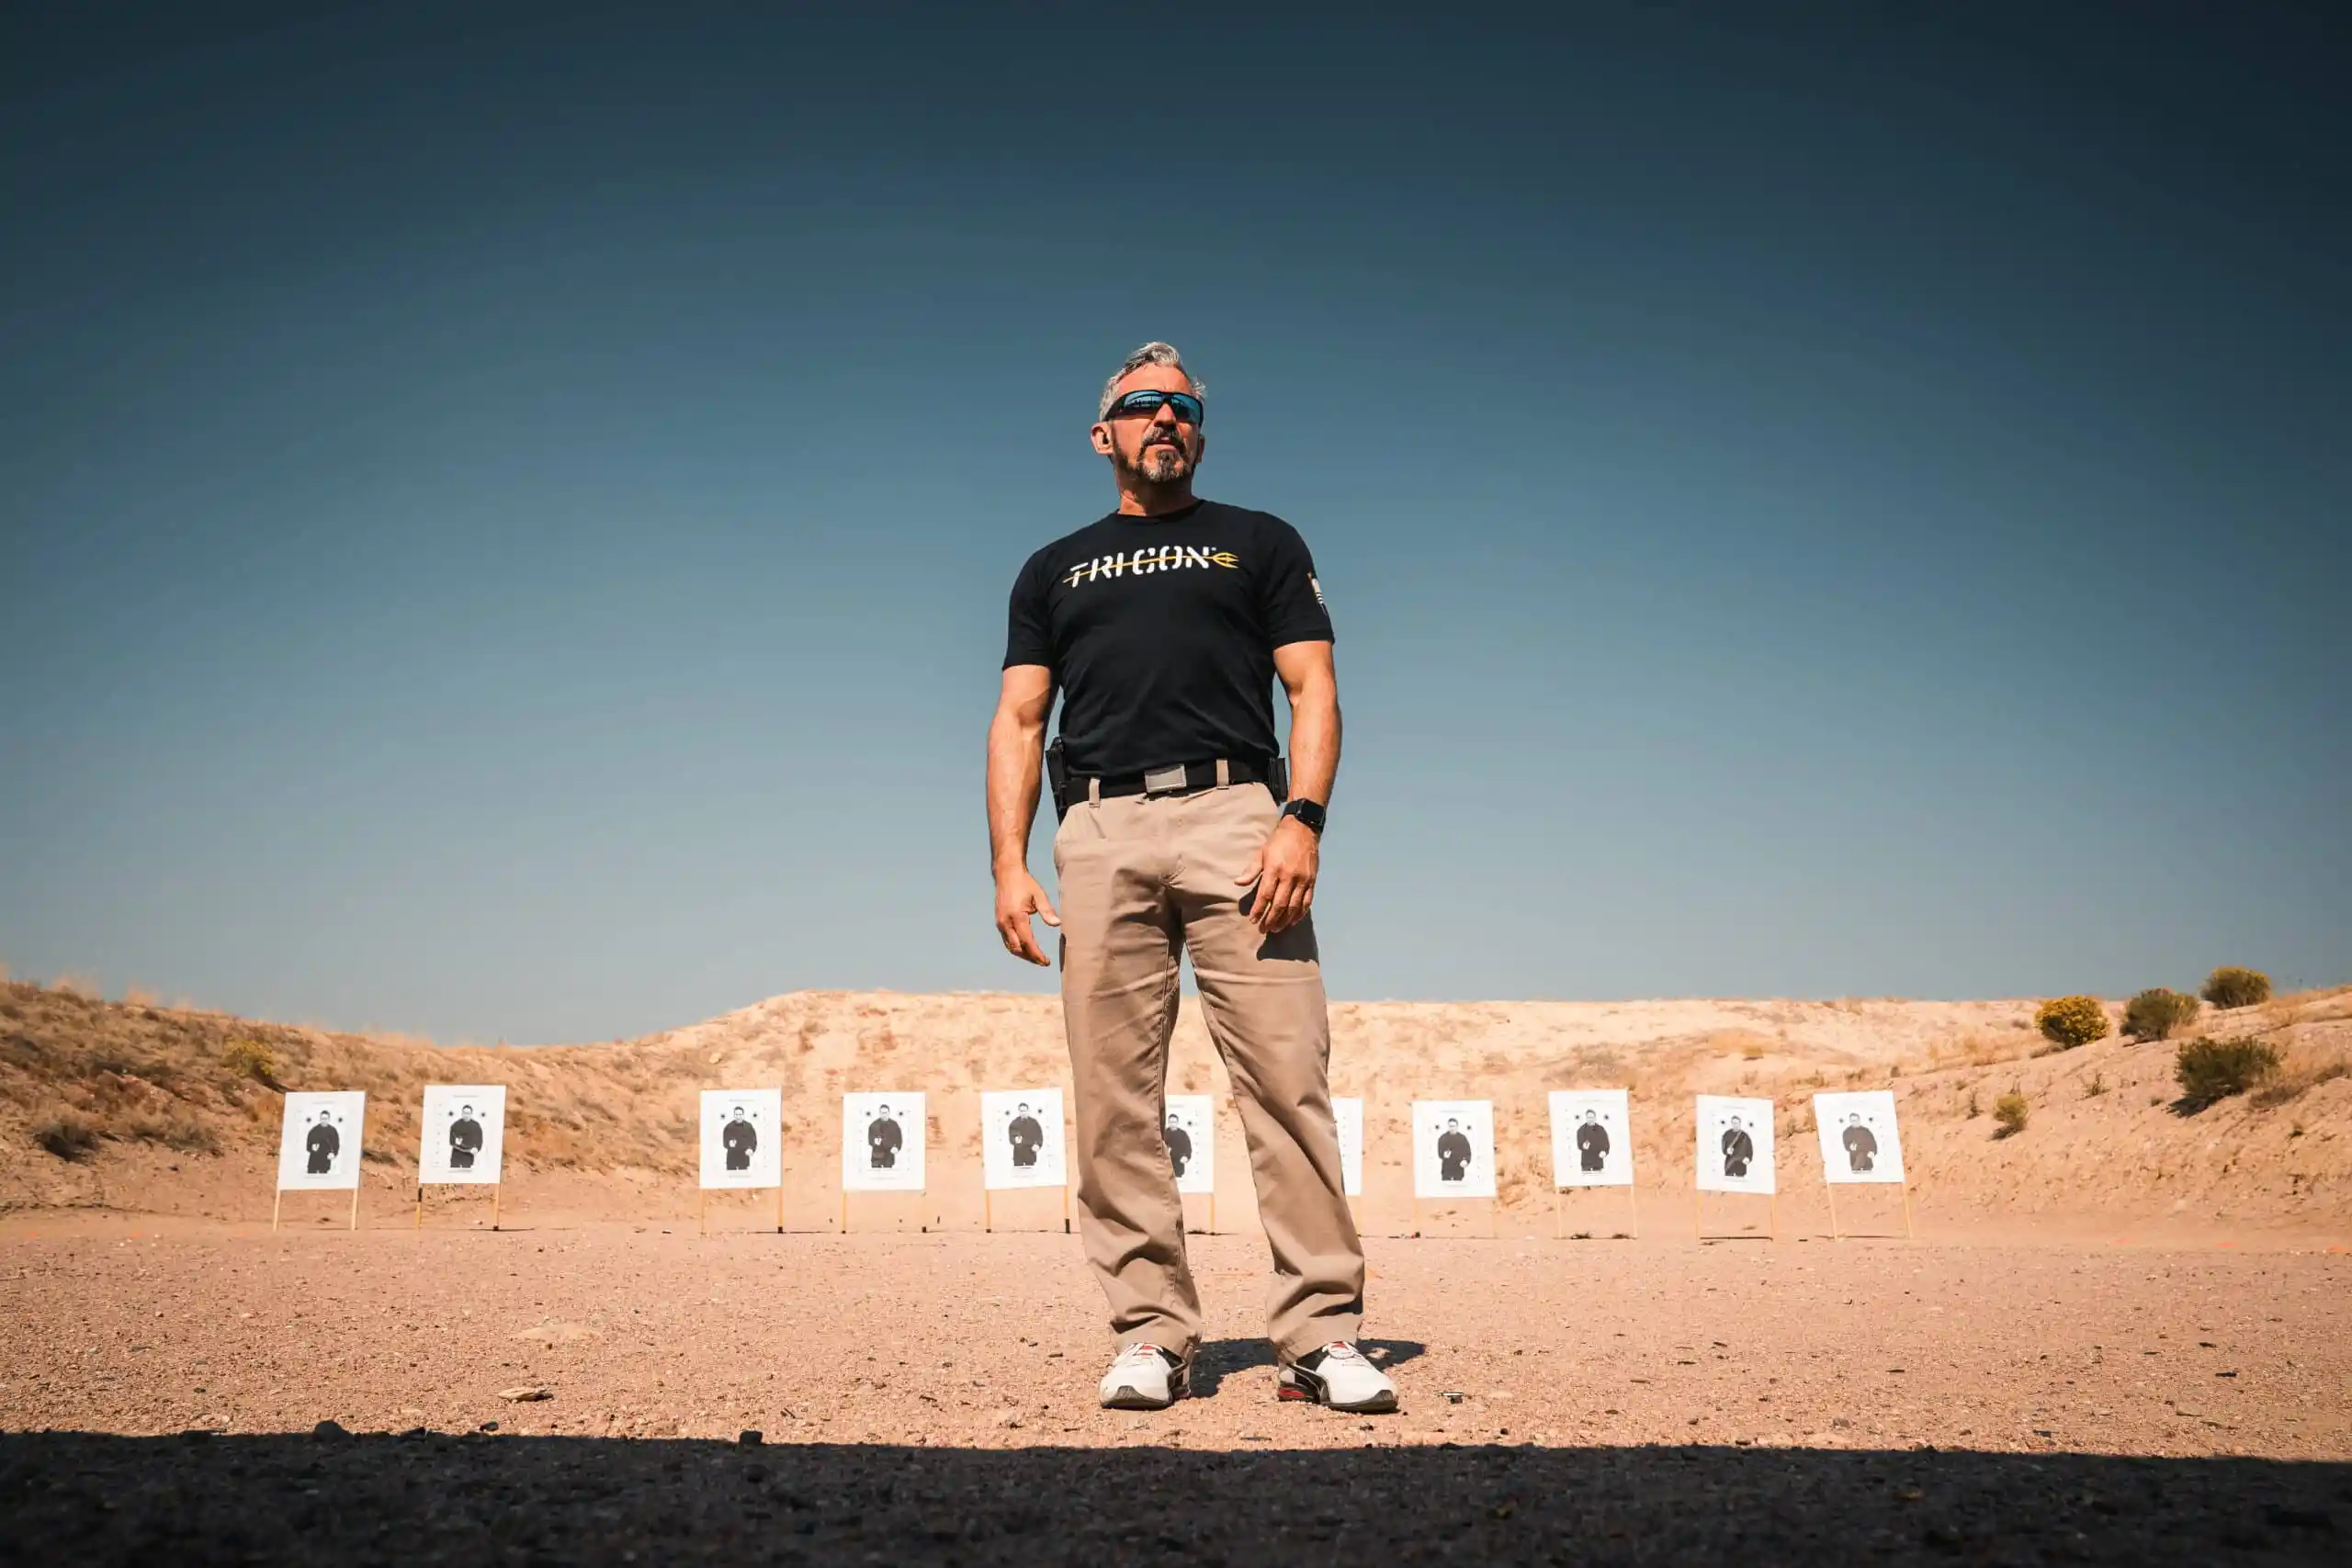 Jeff Gonzales, well-known firearms instructor talks about Every Day Carry, or EDC, on which he's a subject matter expert.